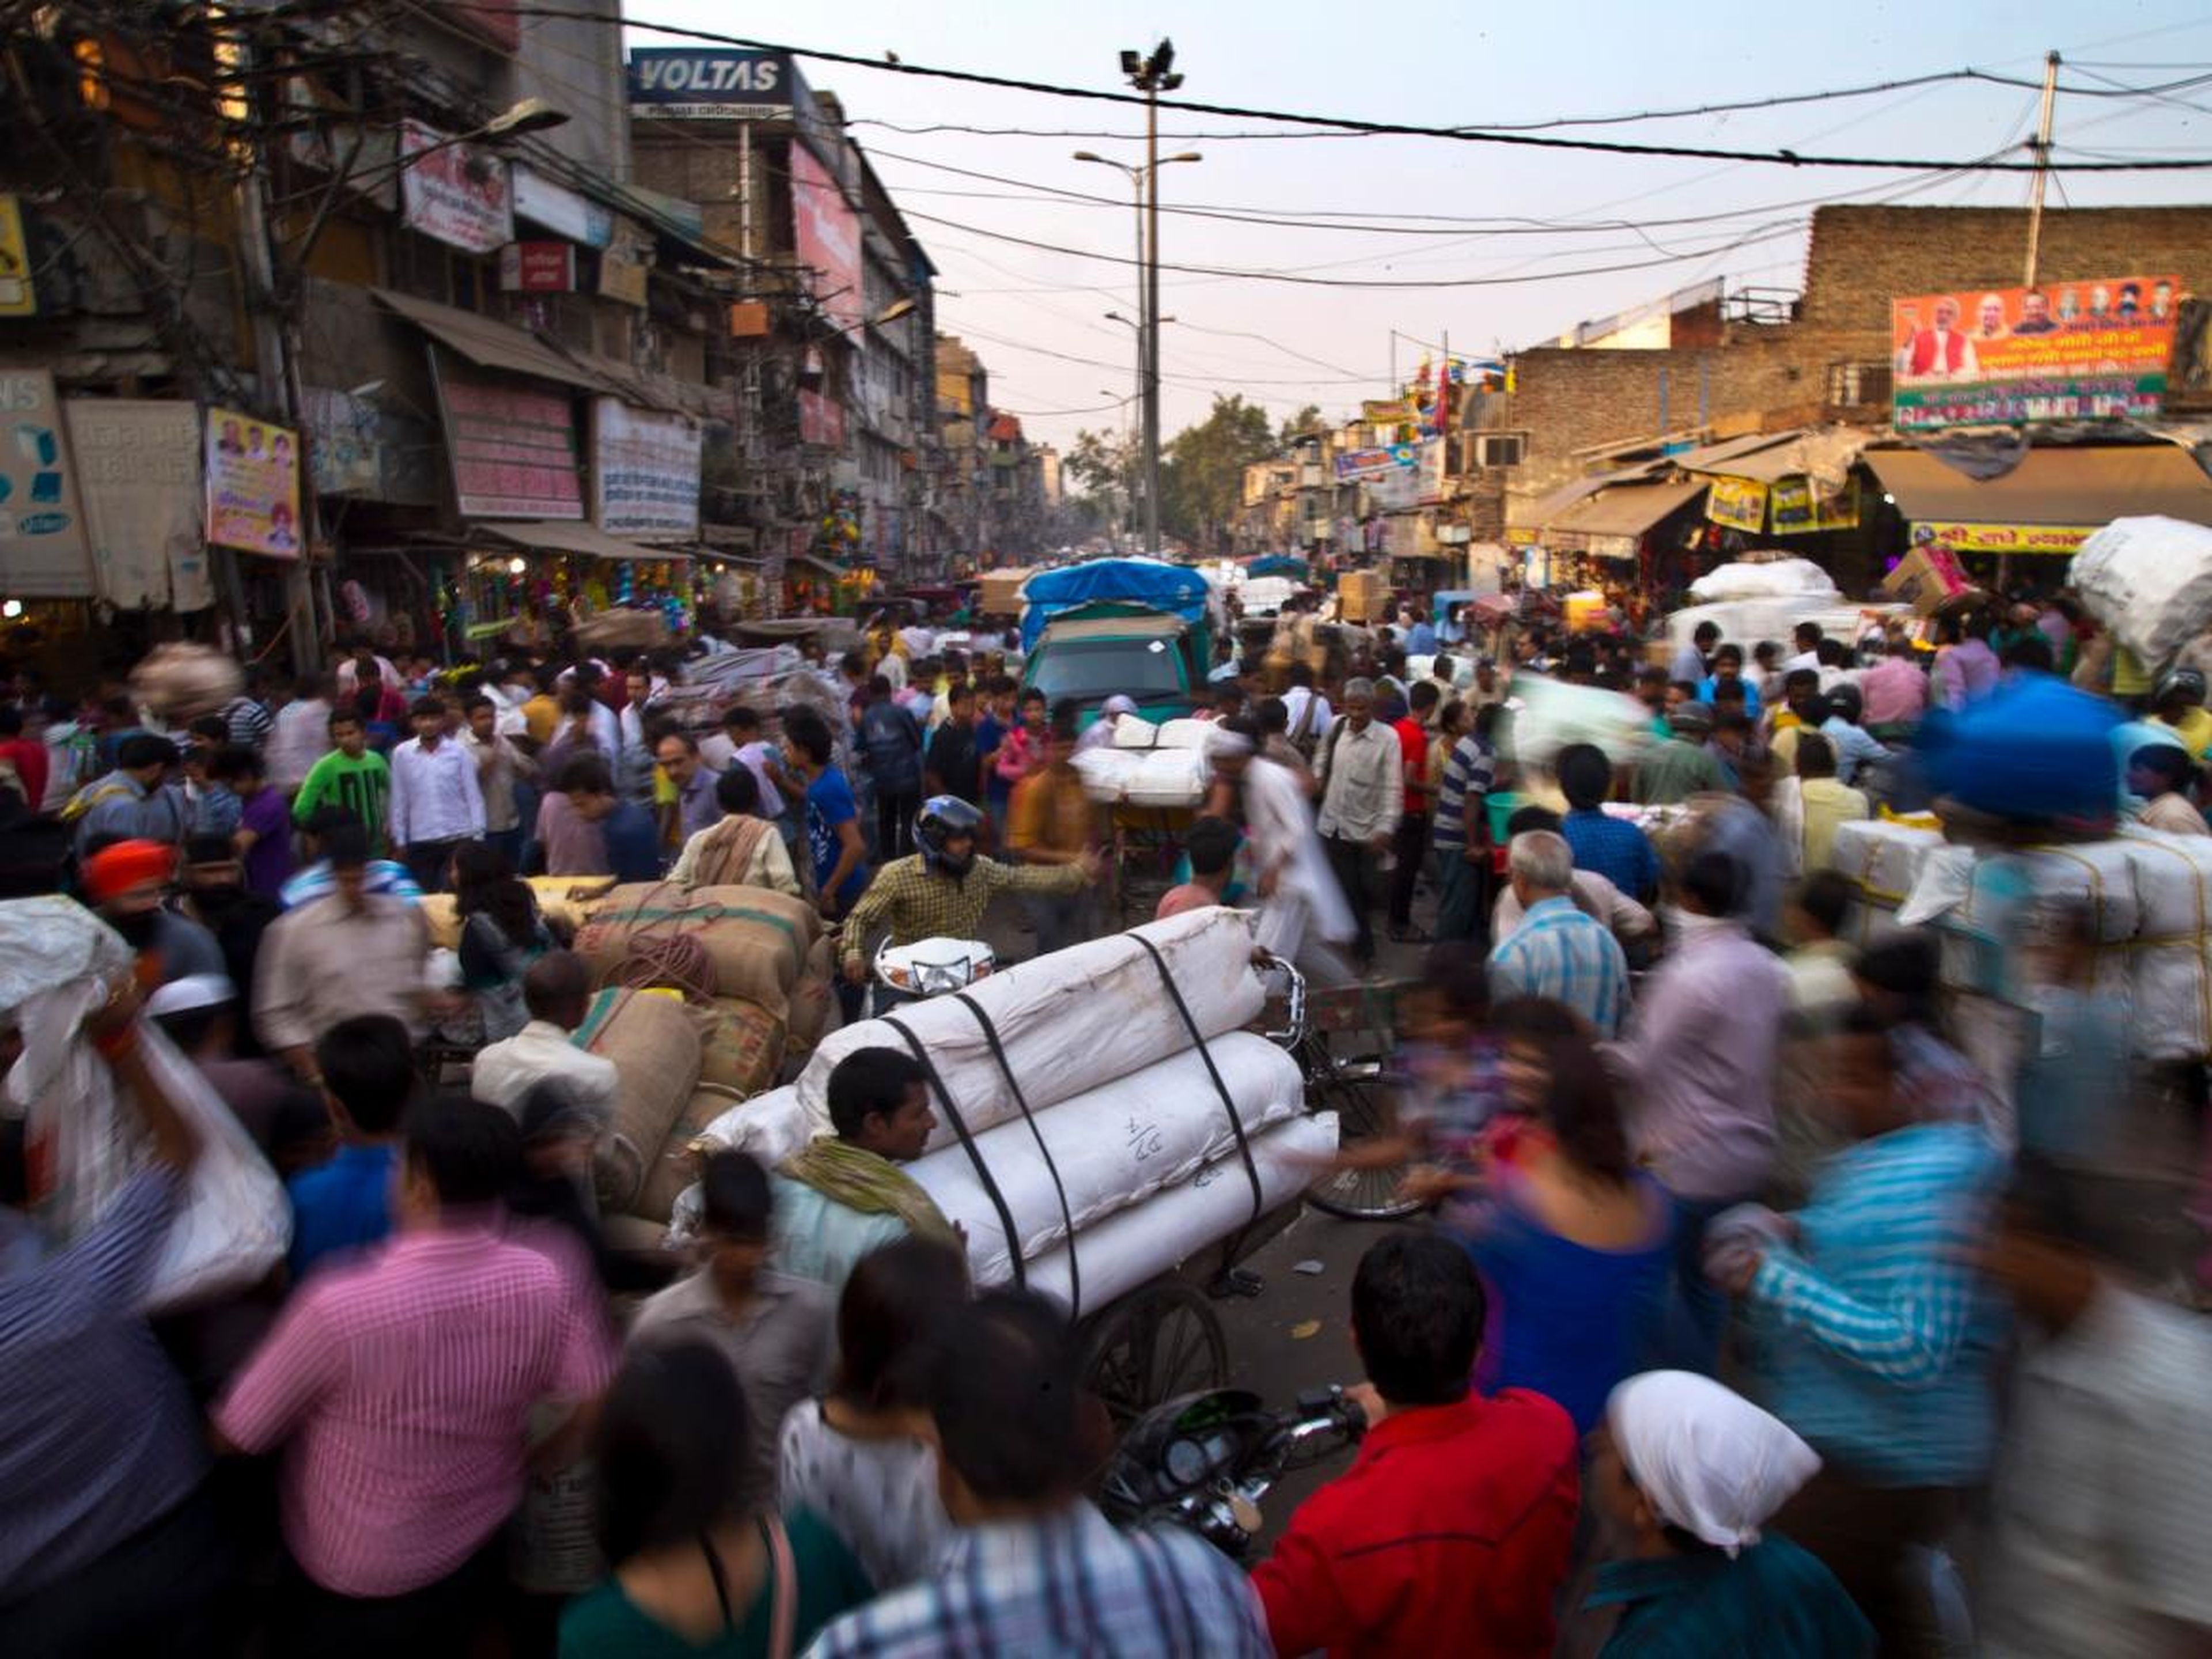 Thousands of people hit the streets in India for not-to-miss bargains on clothes, jewelry, lights, and more.